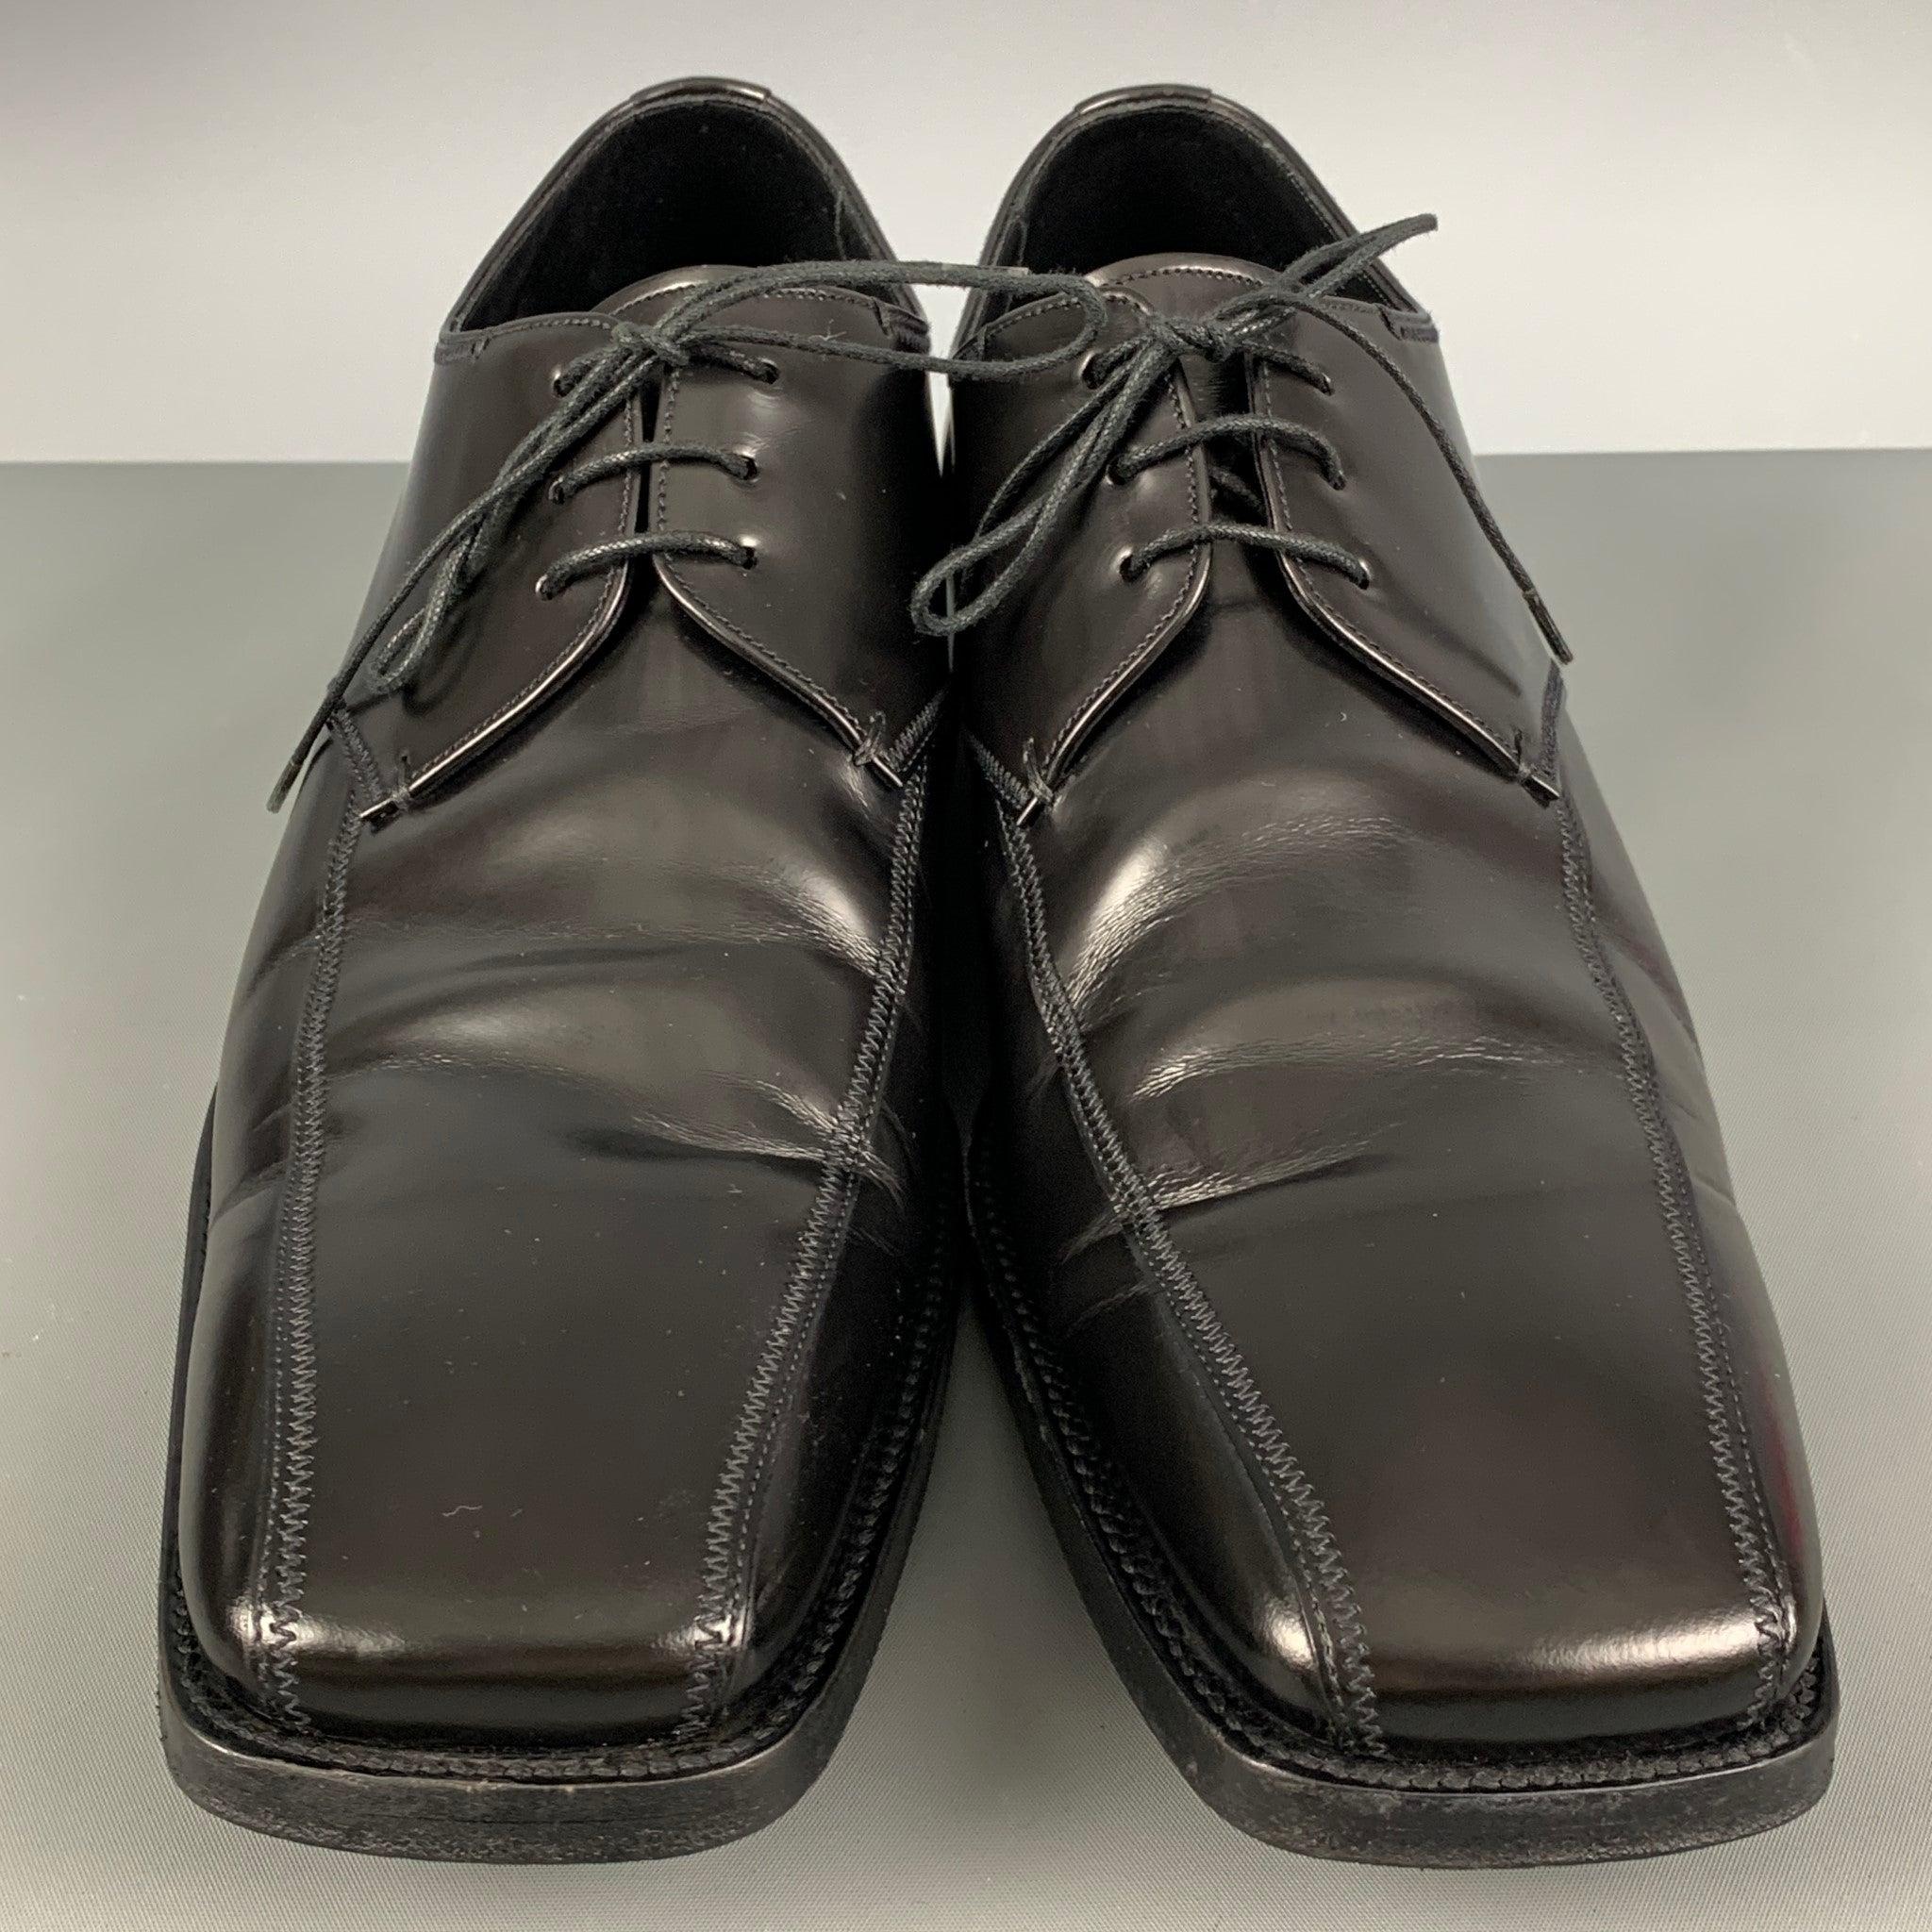 Men's PRADA Size 10.5 Black Leather Square Toe Lace Up Shoes For Sale